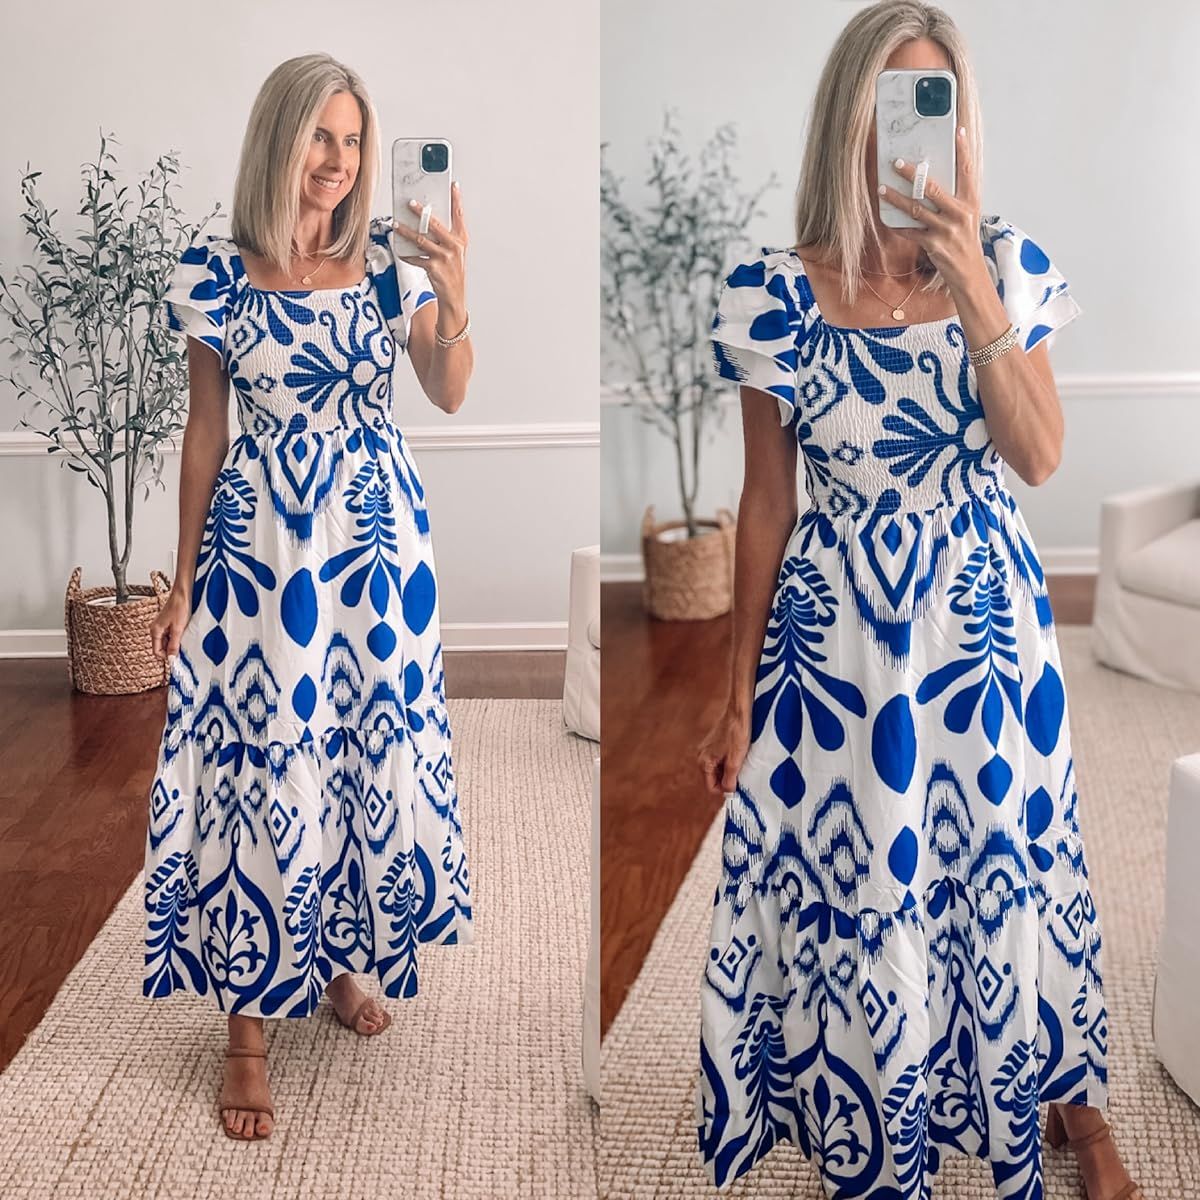 The prettiest Amazon dress! I am 5’6 for reference and wearing a small. Would make the perfect Easter dress or vacation dress! #amazonfashion #founditonamazon #womensstyle | Amazon (US)